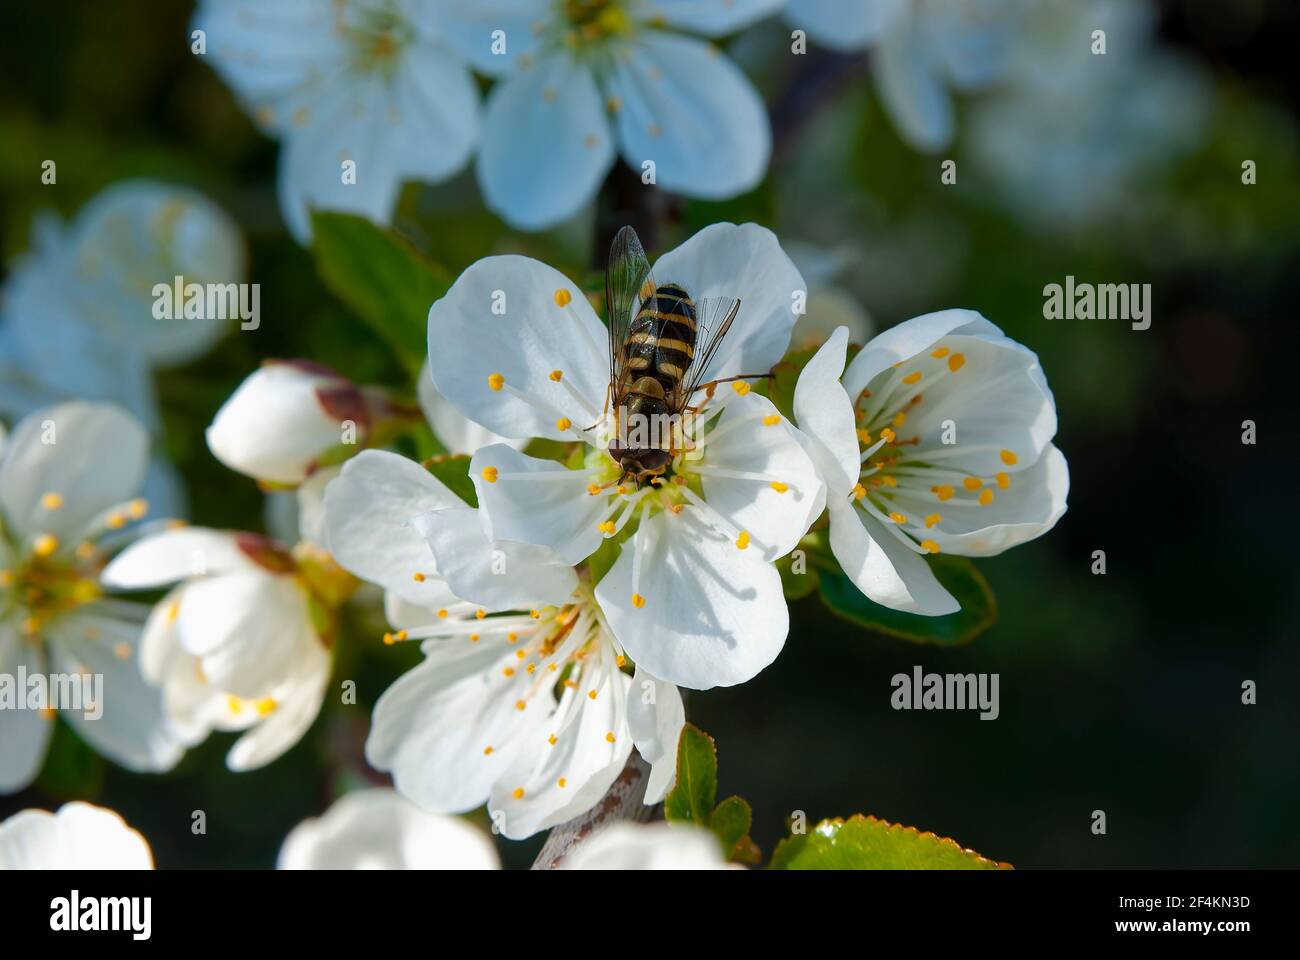 Cherry blossom and bee. Stock Photo